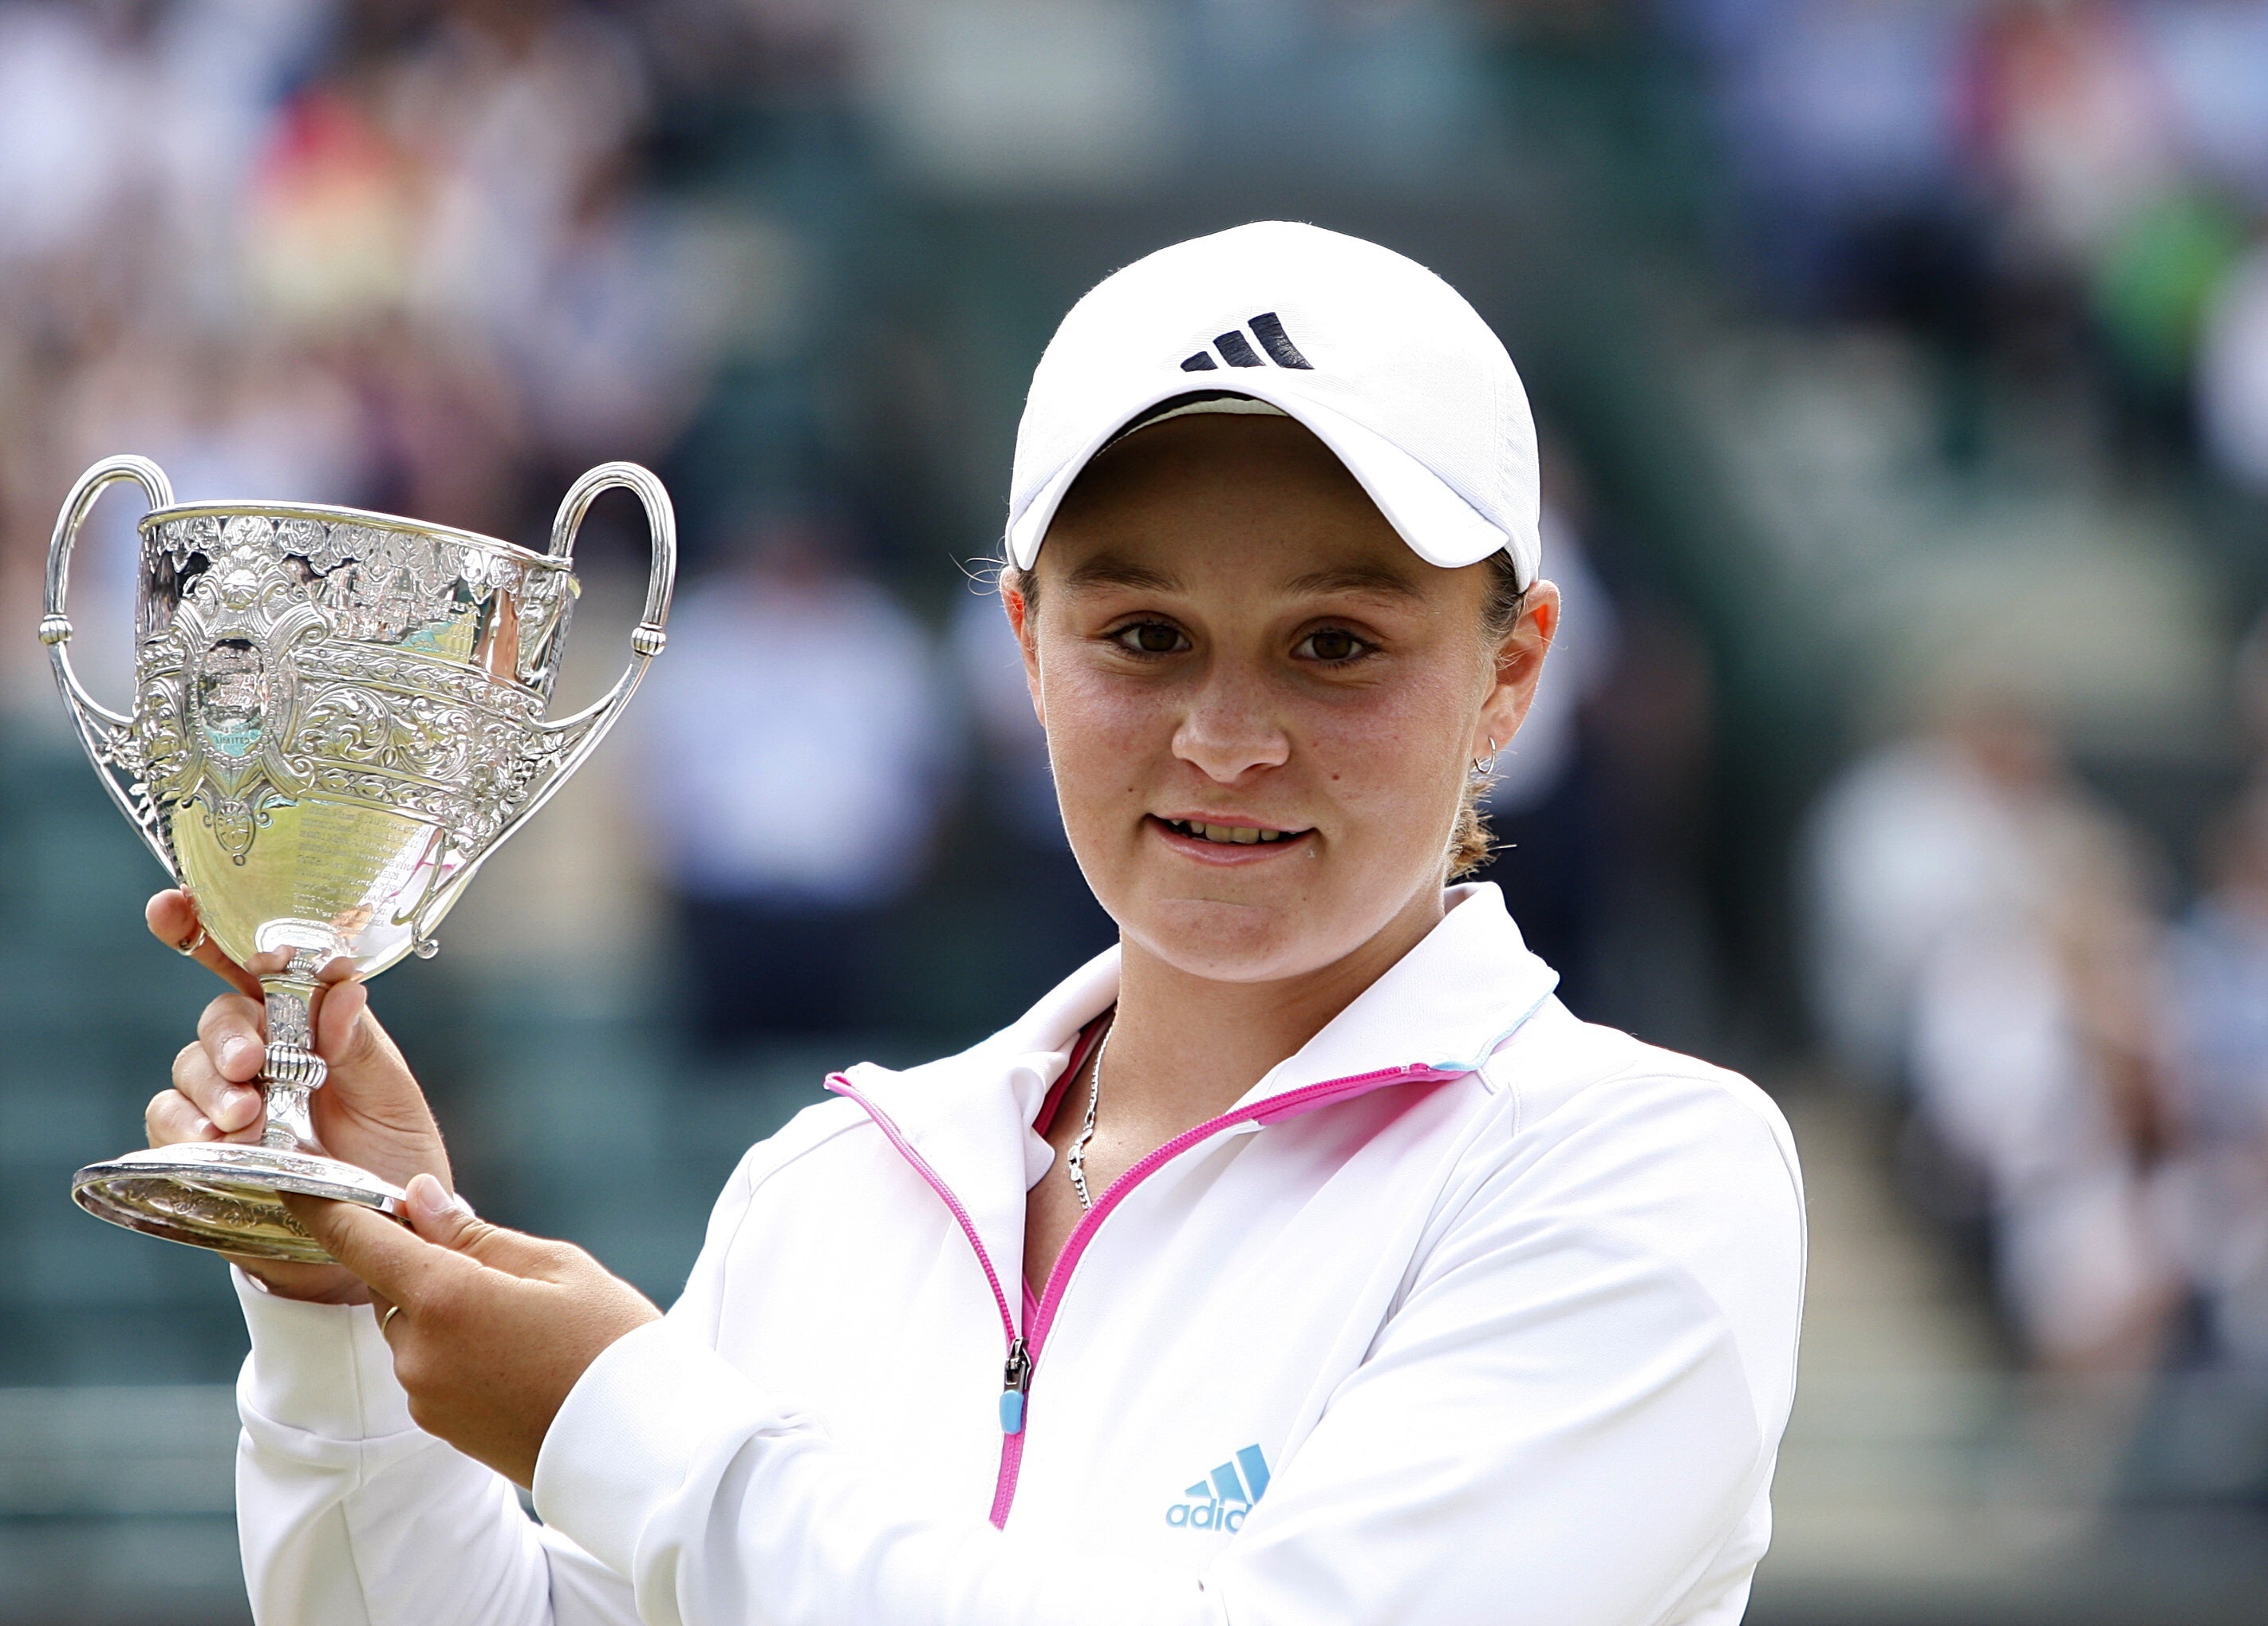 Ashleigh Barty with her trophy after defeating Russia’s Irina Khromacheva in the Girls’ Singles Final on day thirteen of the 2011 Wimbledon Championships (Sean Dempsey/PA)